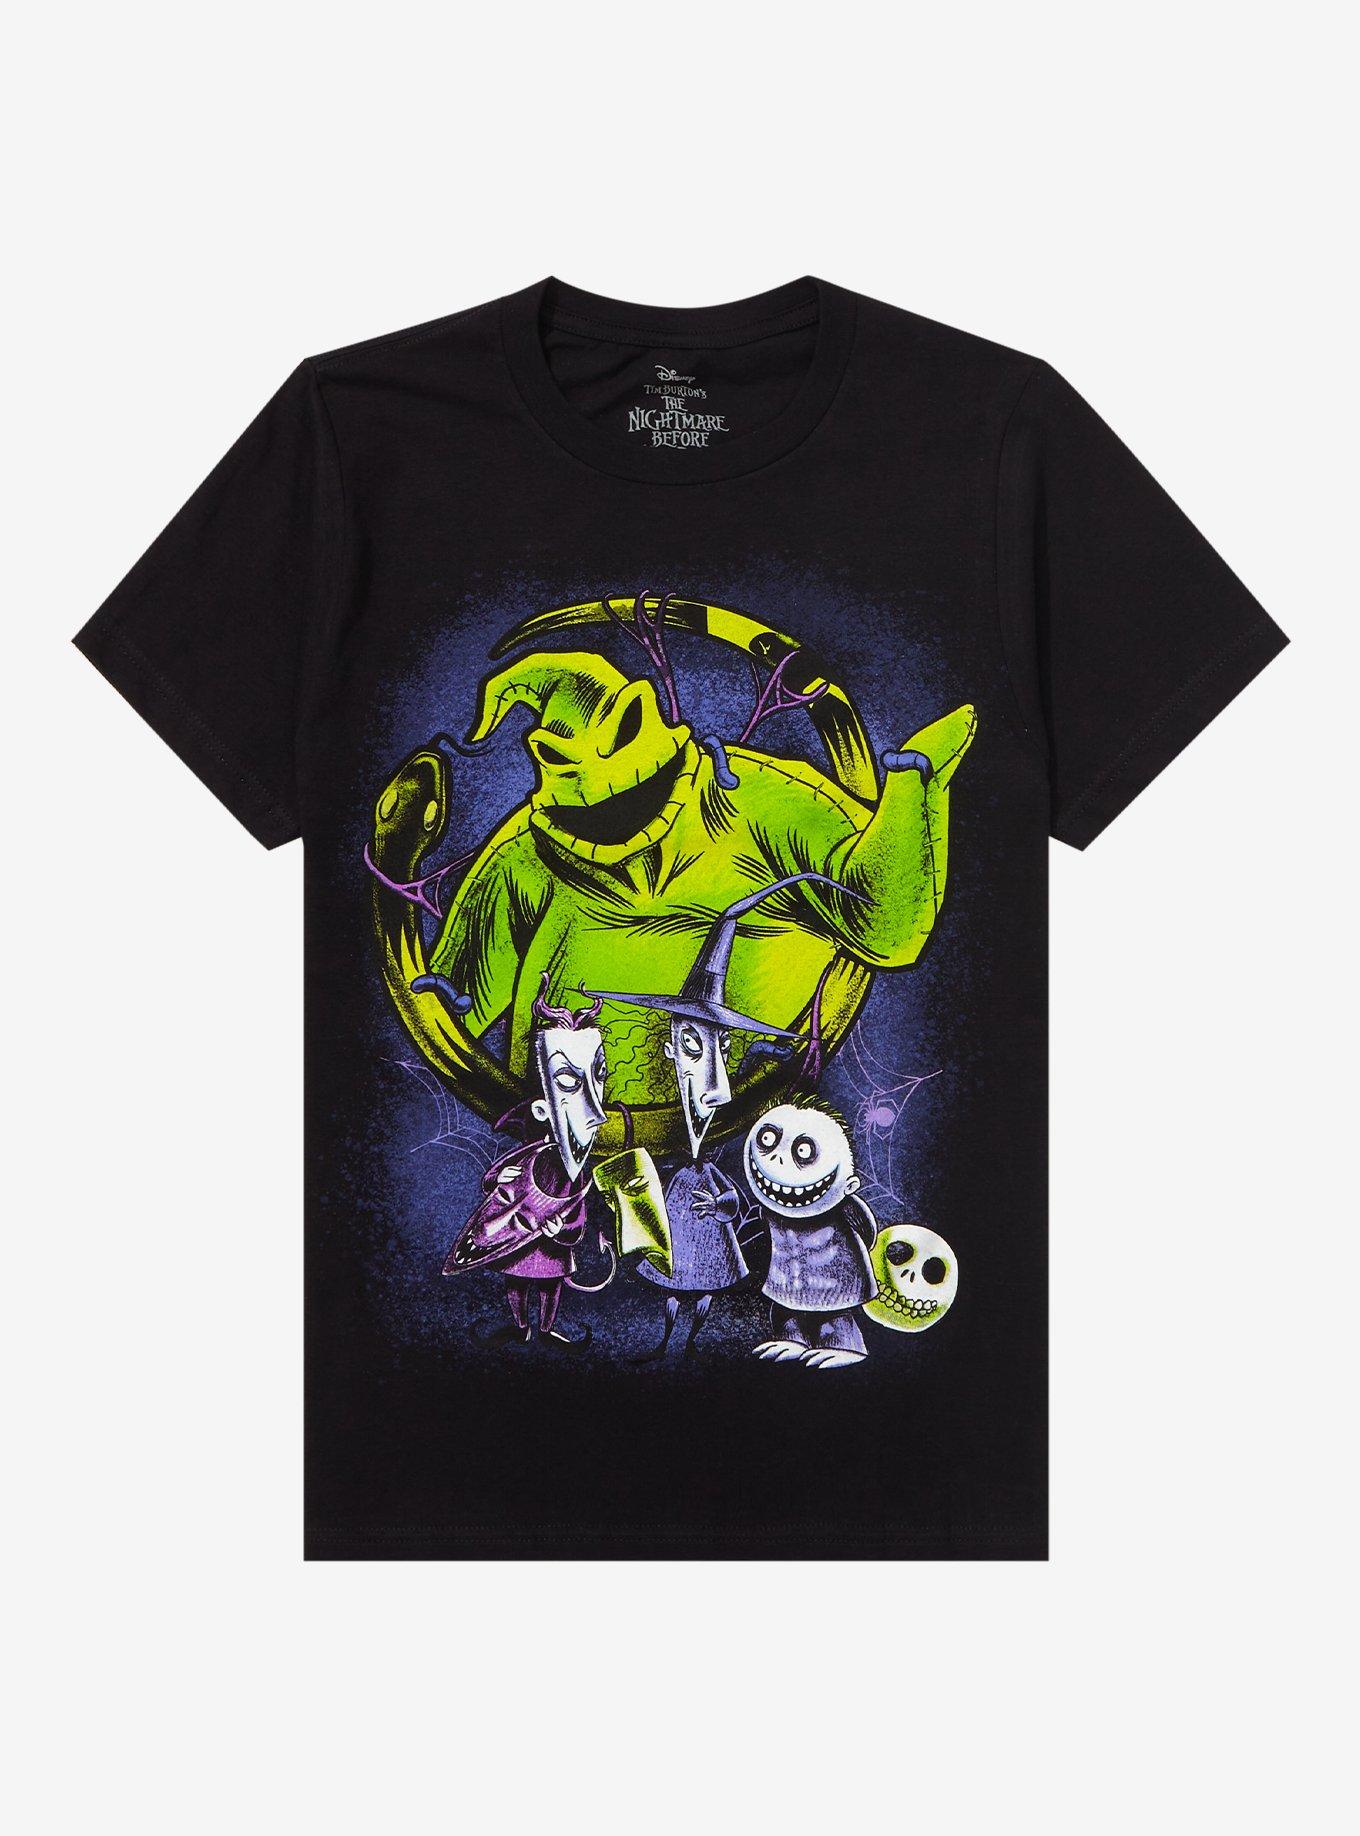 Oogie Boogie The Shadow on The Moon Baseball Jersey | Oogie Boogie